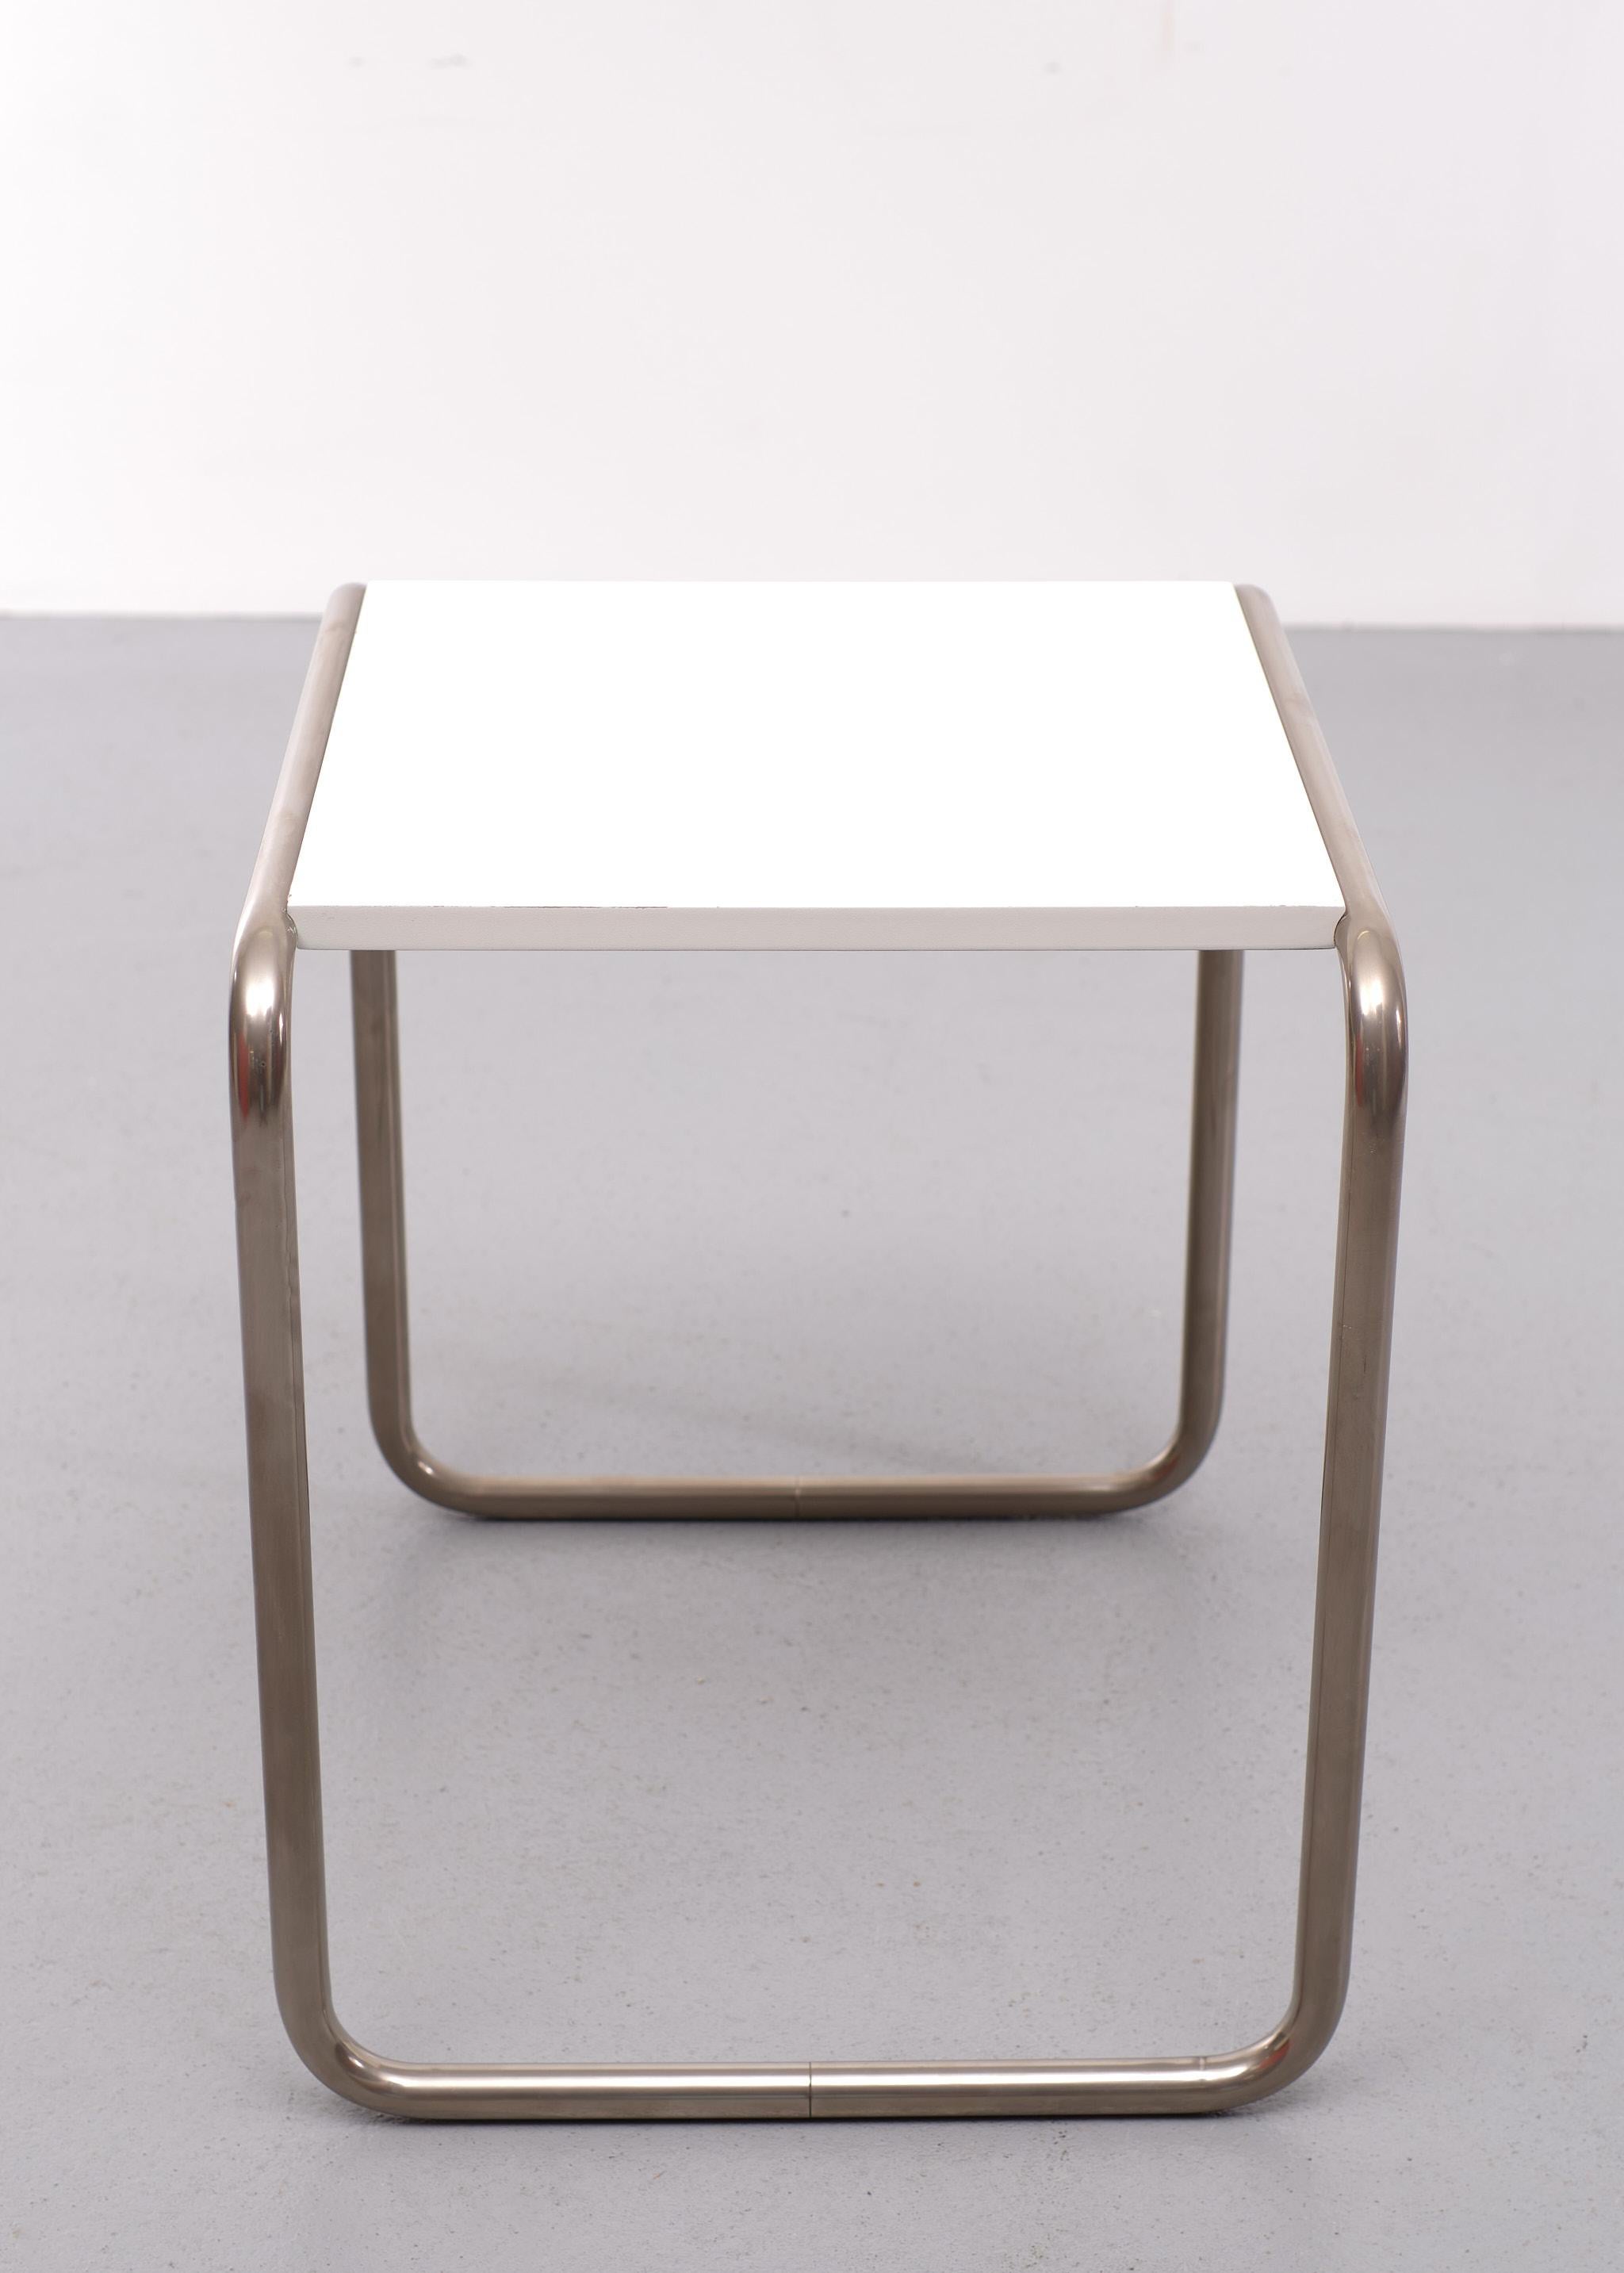 Beautiful solid side table designed by Marcel Breuer for the Bauhaus. It is marked with the Bauhaus logo and produced by Tecta Lauenförde. These tables have not been available for a long time.

Light traces of use on the blade; the steel is in